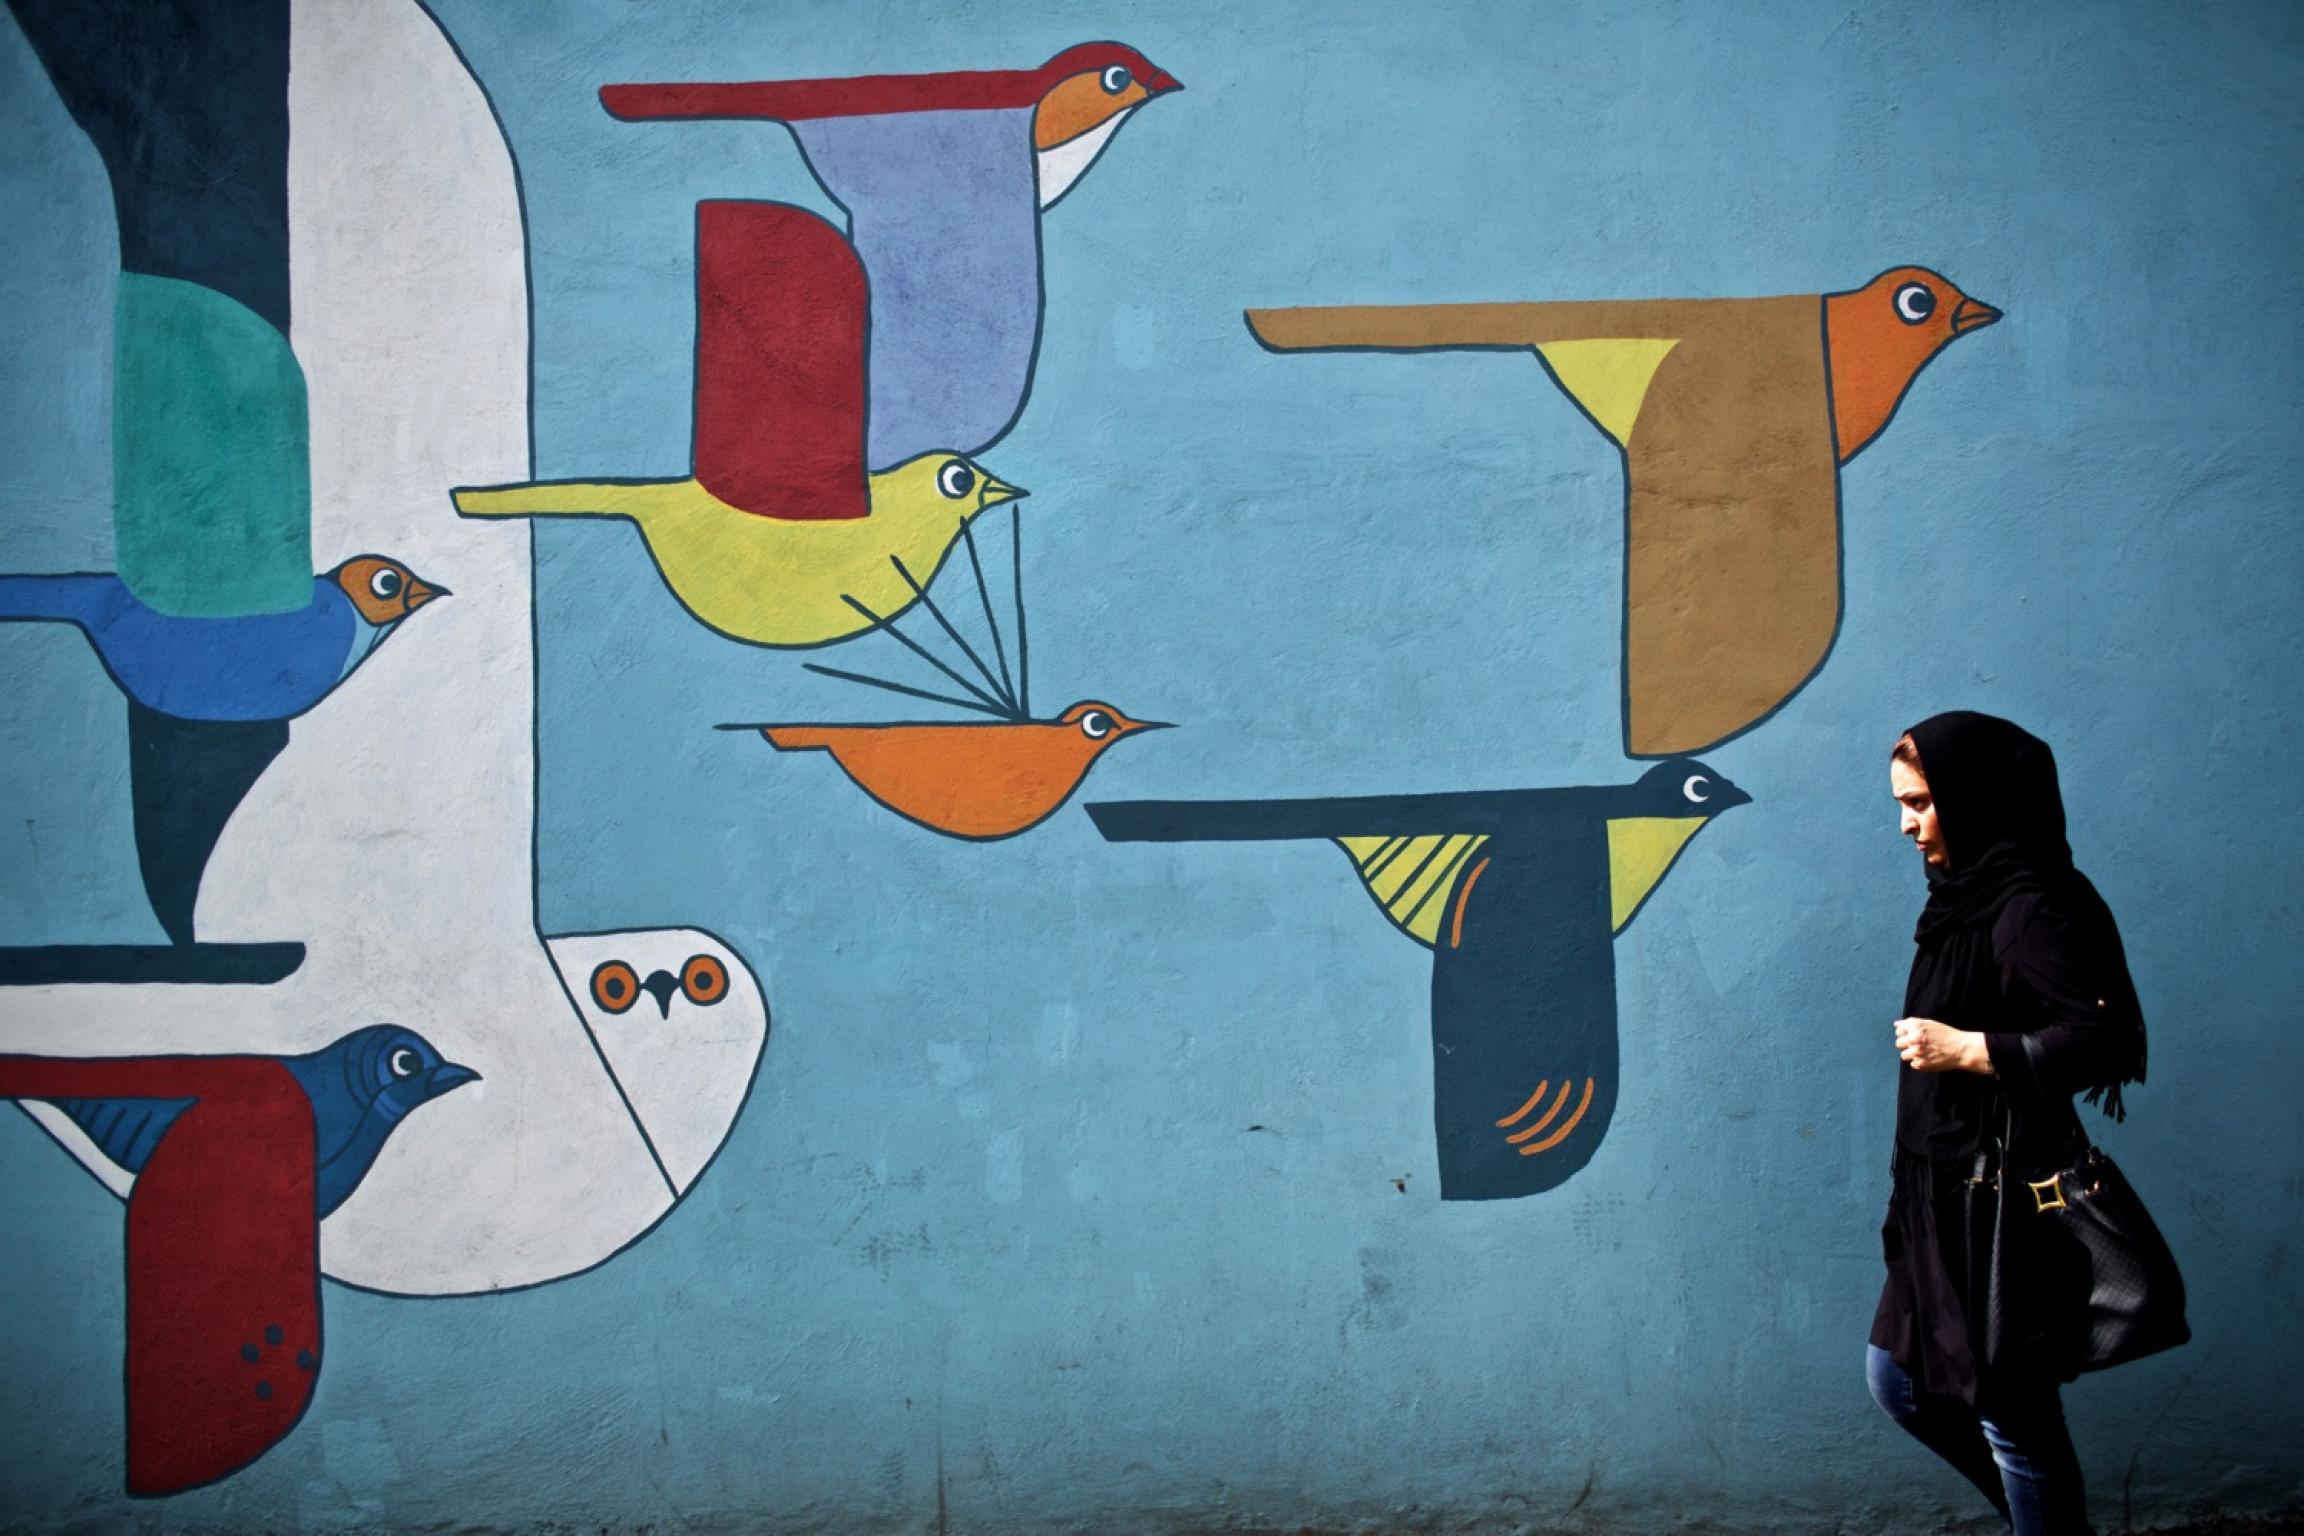 An Iranian woman walks past a mural in Tehran on June 29, 2015. Behrouz Mehri (AFP/Getty Images)